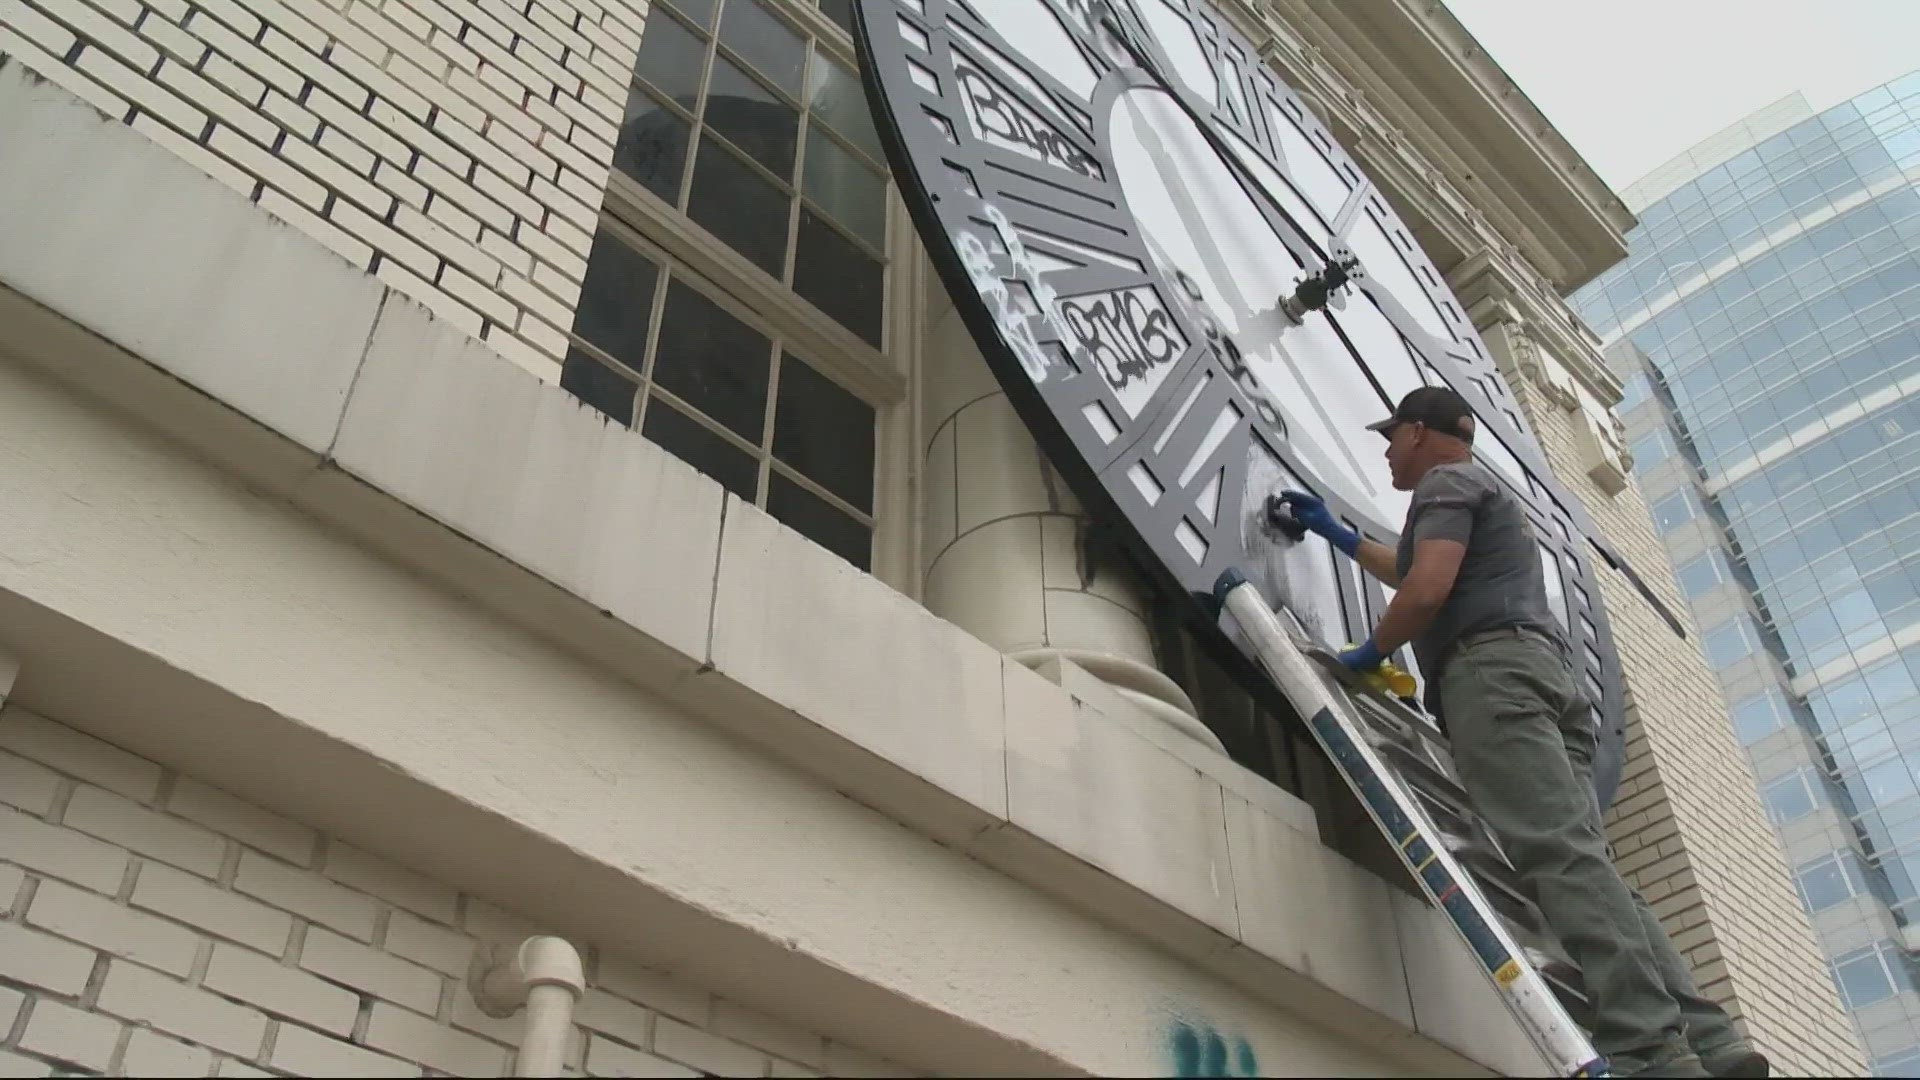 A crew is going to be working on removing graffiti from the Jackson Tower over the next two days.